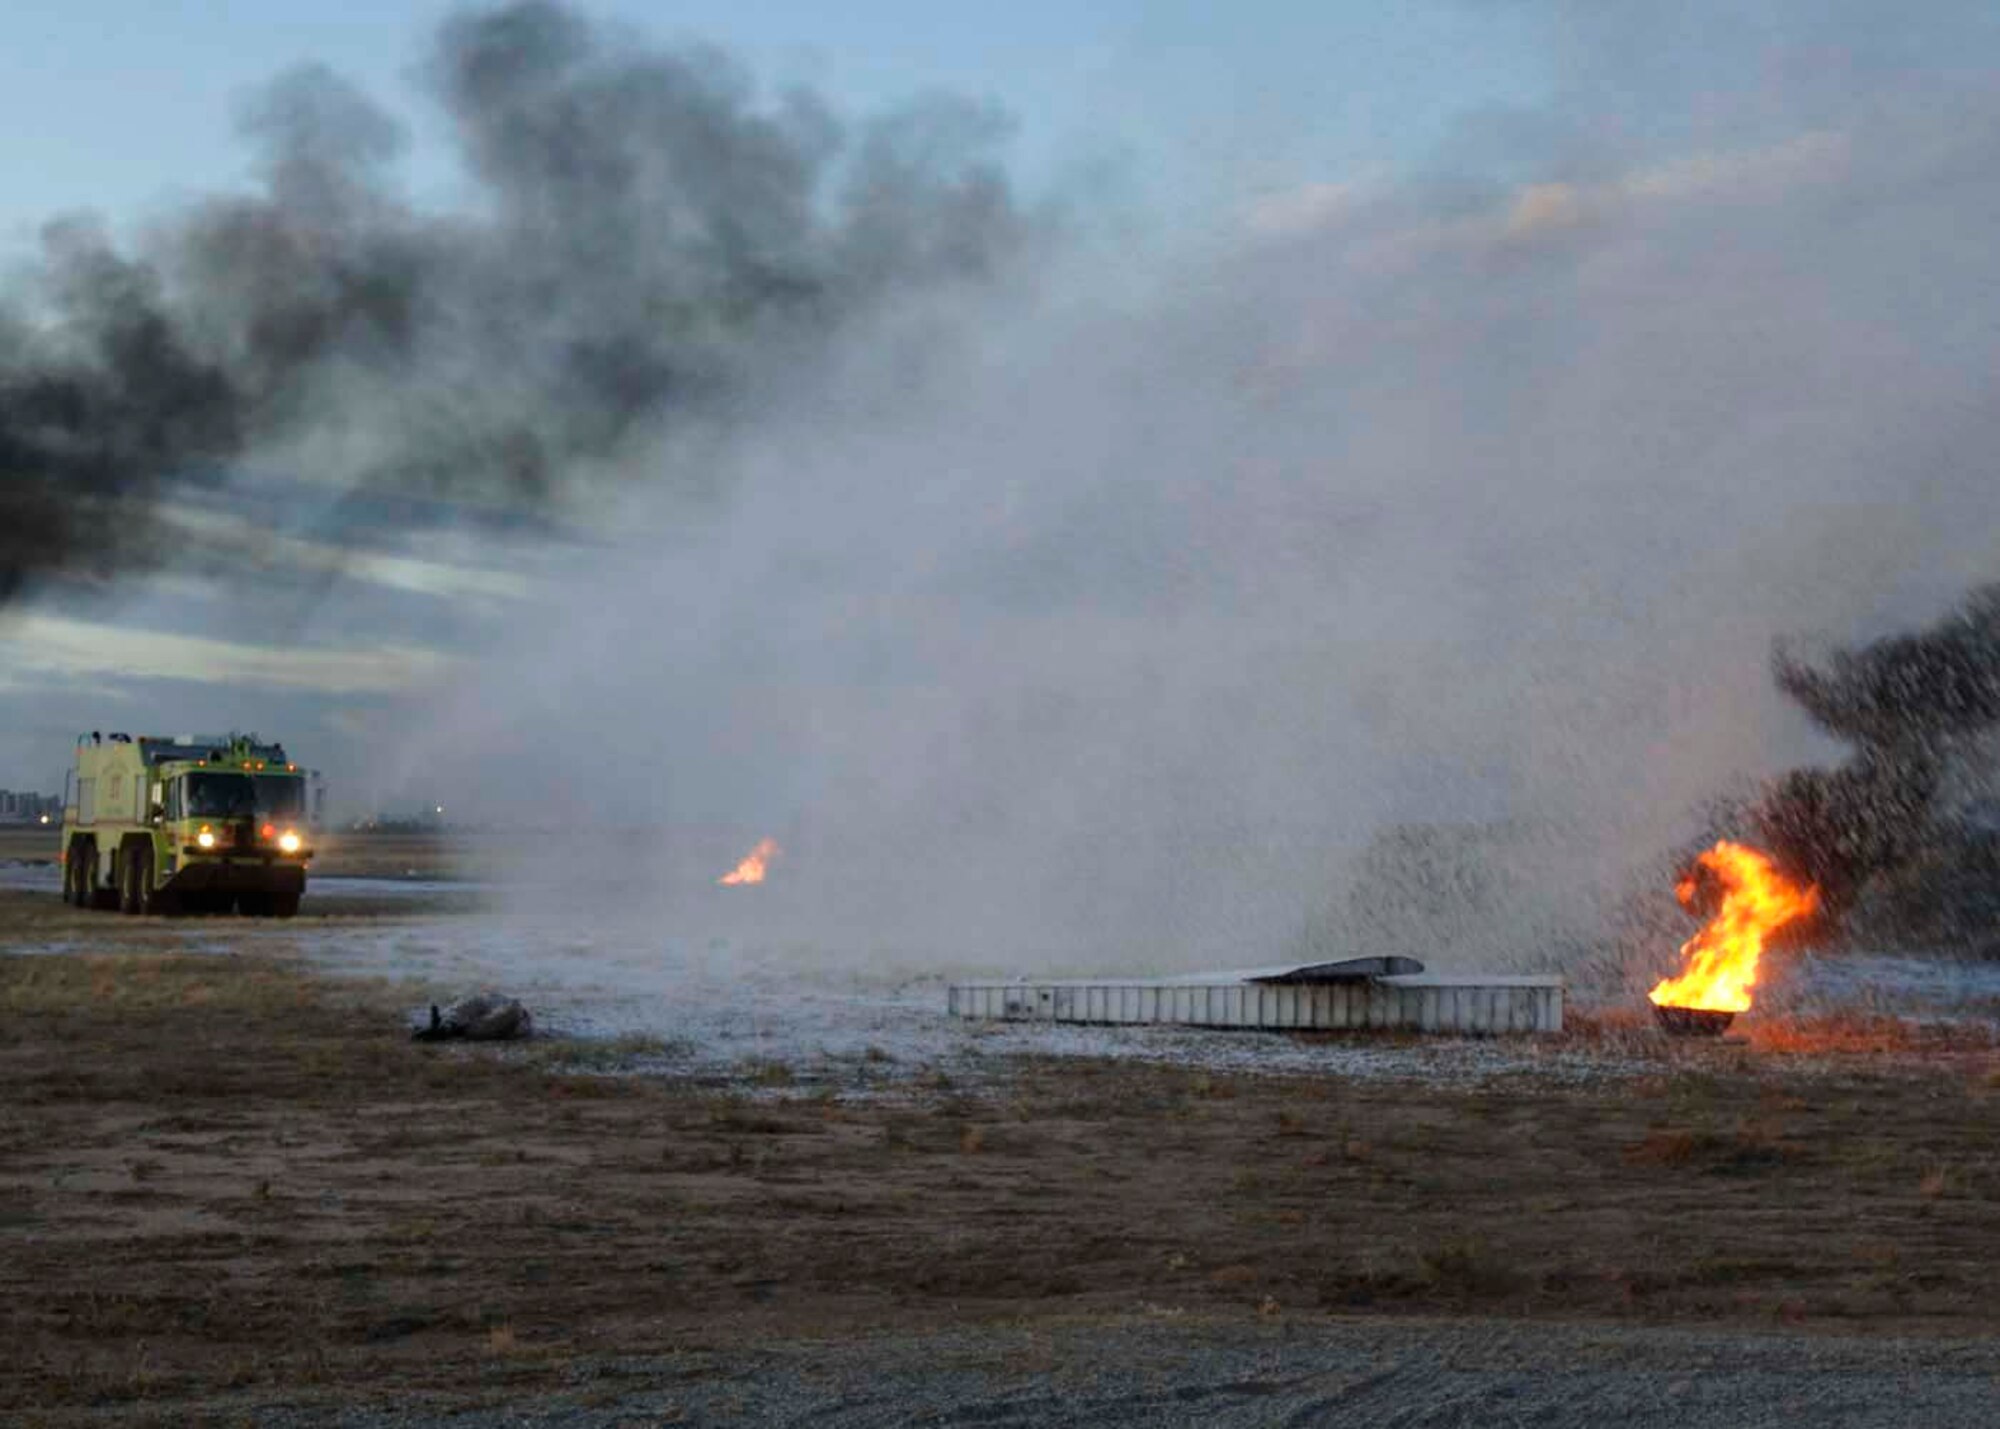 Davis-Monthan Air Force Base firefighters put out a fire by the use of foam at a simulated crash site of a C-17 Globemaster III Dec. 4 at Davis-Monthan AFB, Ariz. Exercise Vigilant Shield 07 is a joint Department of Defense and federal nuclear weapon accident exercise. The exercise scenario involved a C-17 carrying four nuclear weapons to be diverted to Davis-Monthan AFB due to simulated engine failure that caused an aircraft accident. Davis-Monthan firefighters, the Tucson Fire Department, Tucson Police Department, and many different agencies ranging form local to national levels responded to the simulated scene. (U.S. Air Force photo/Senior Airman Christina D. Ponte)
